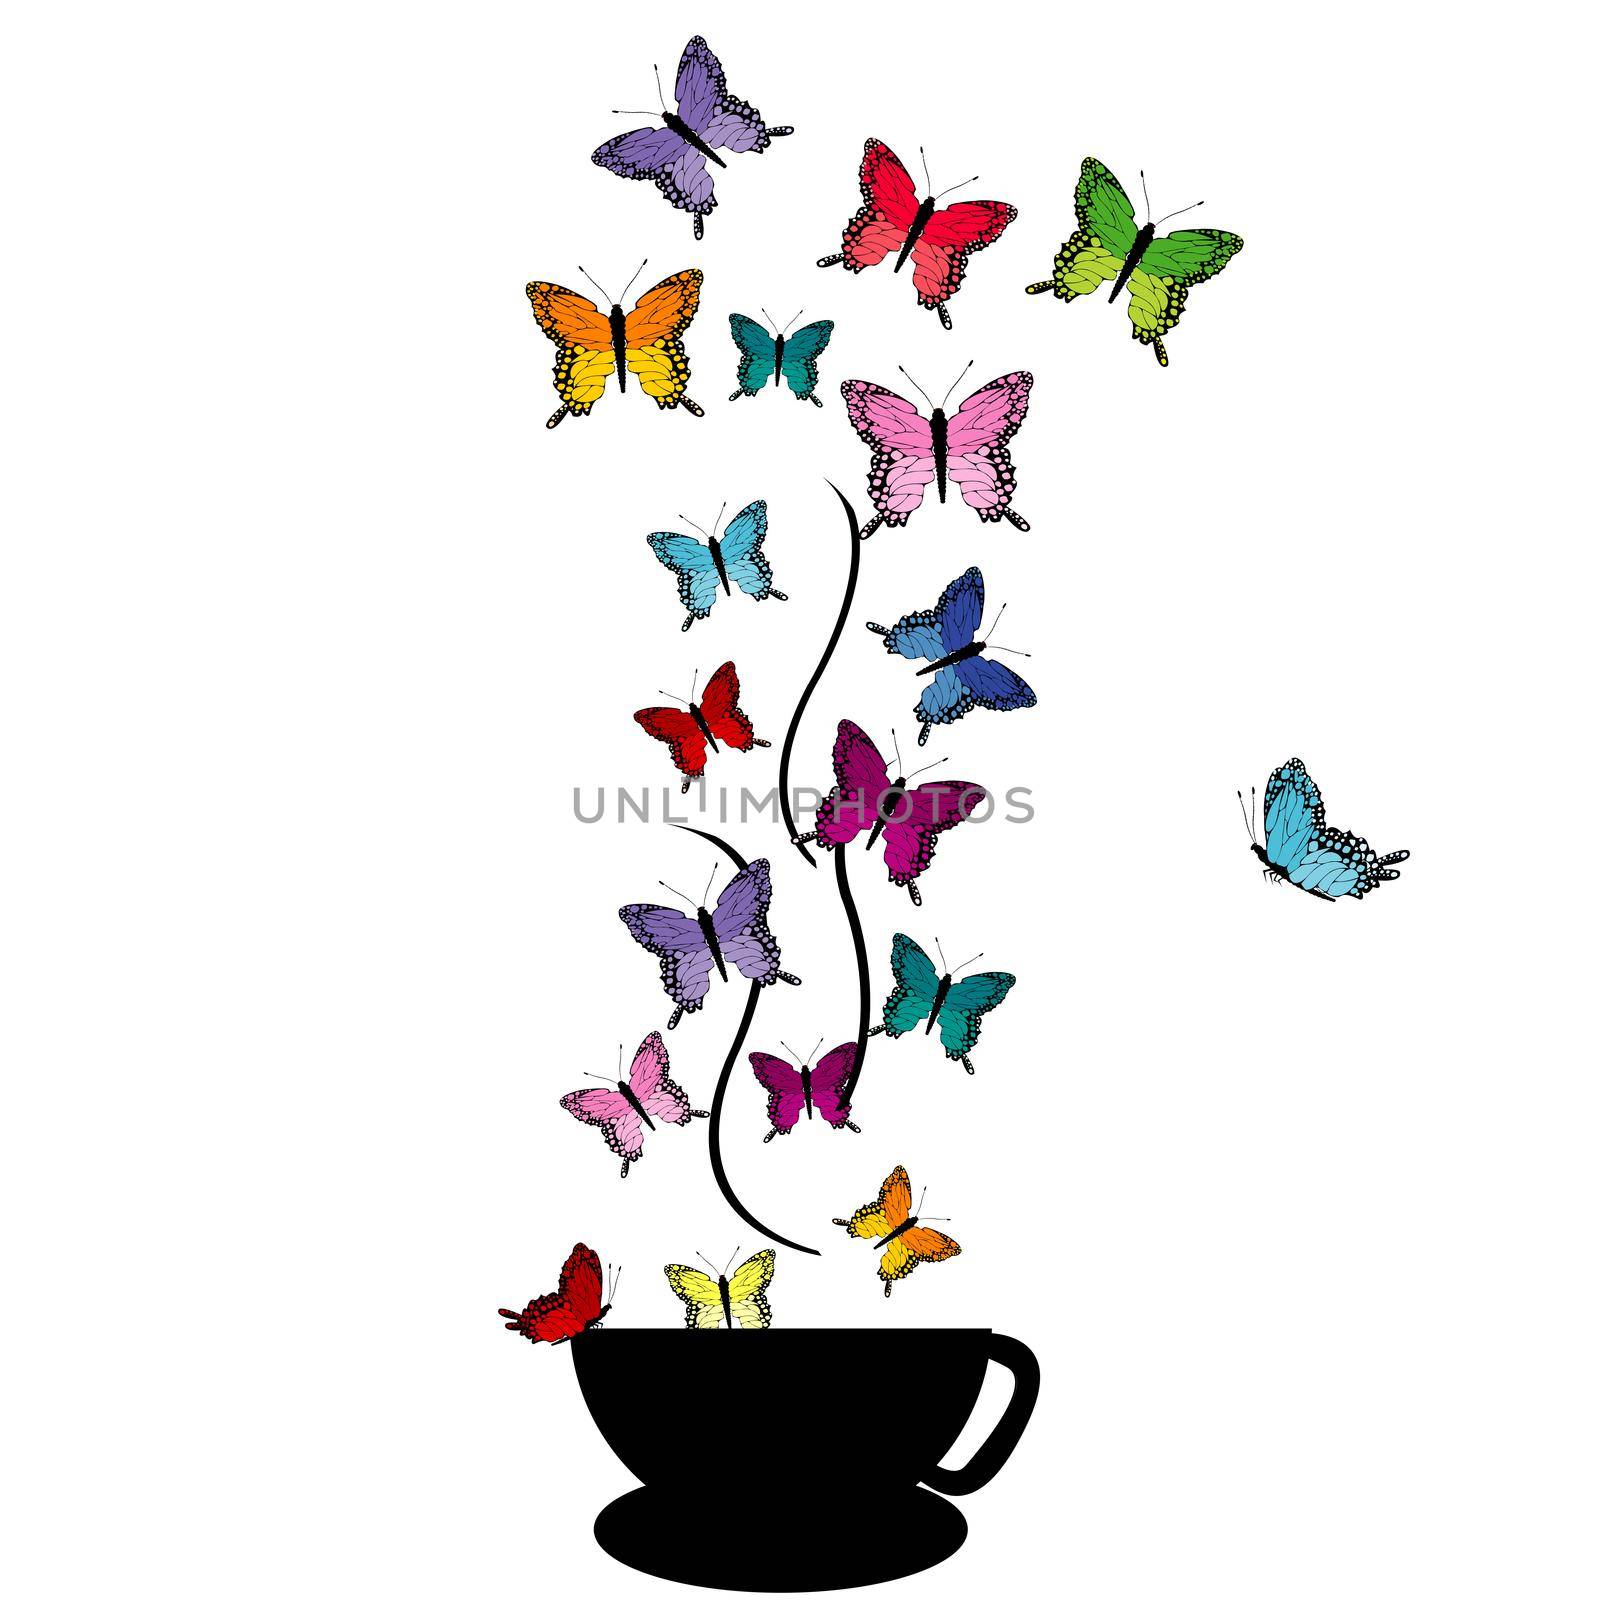 Abstract cup with colored butterflies by hibrida13